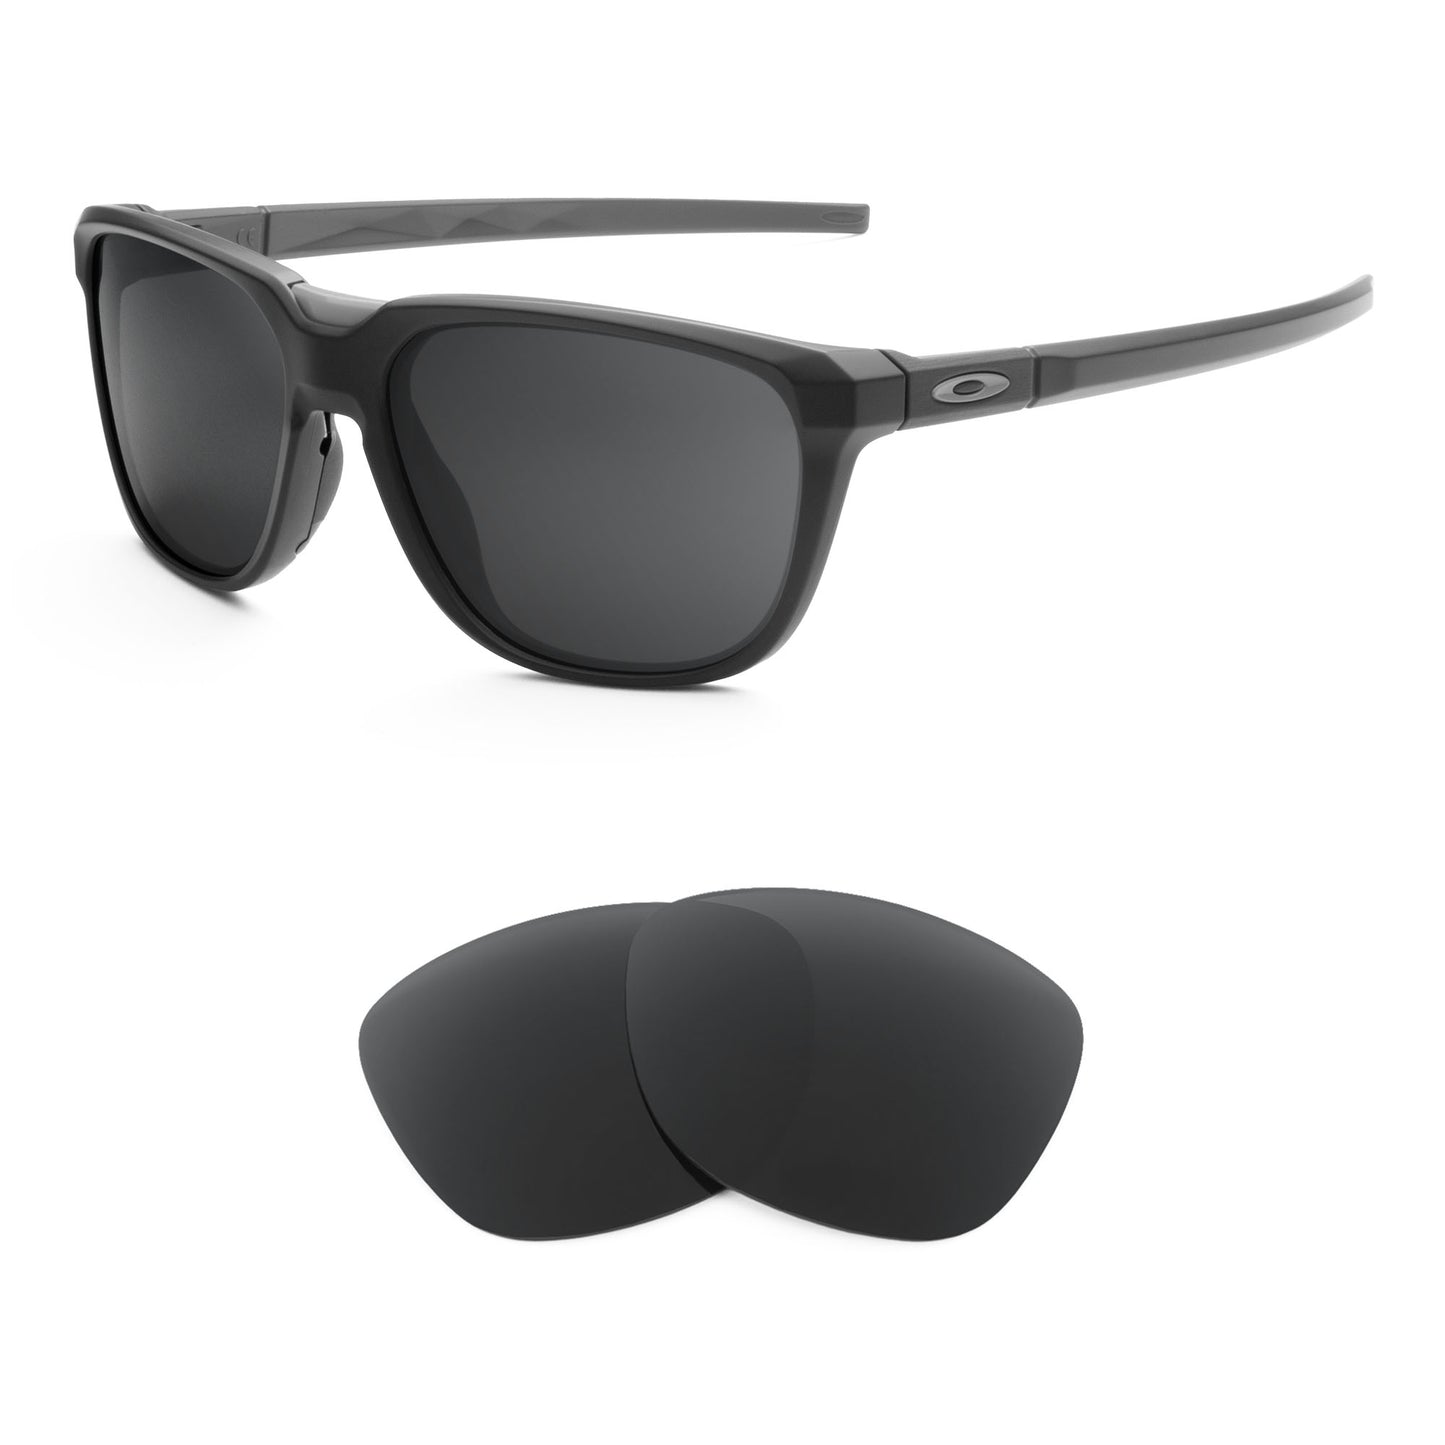 Oakley Anorak sunglasses with replacement lenses